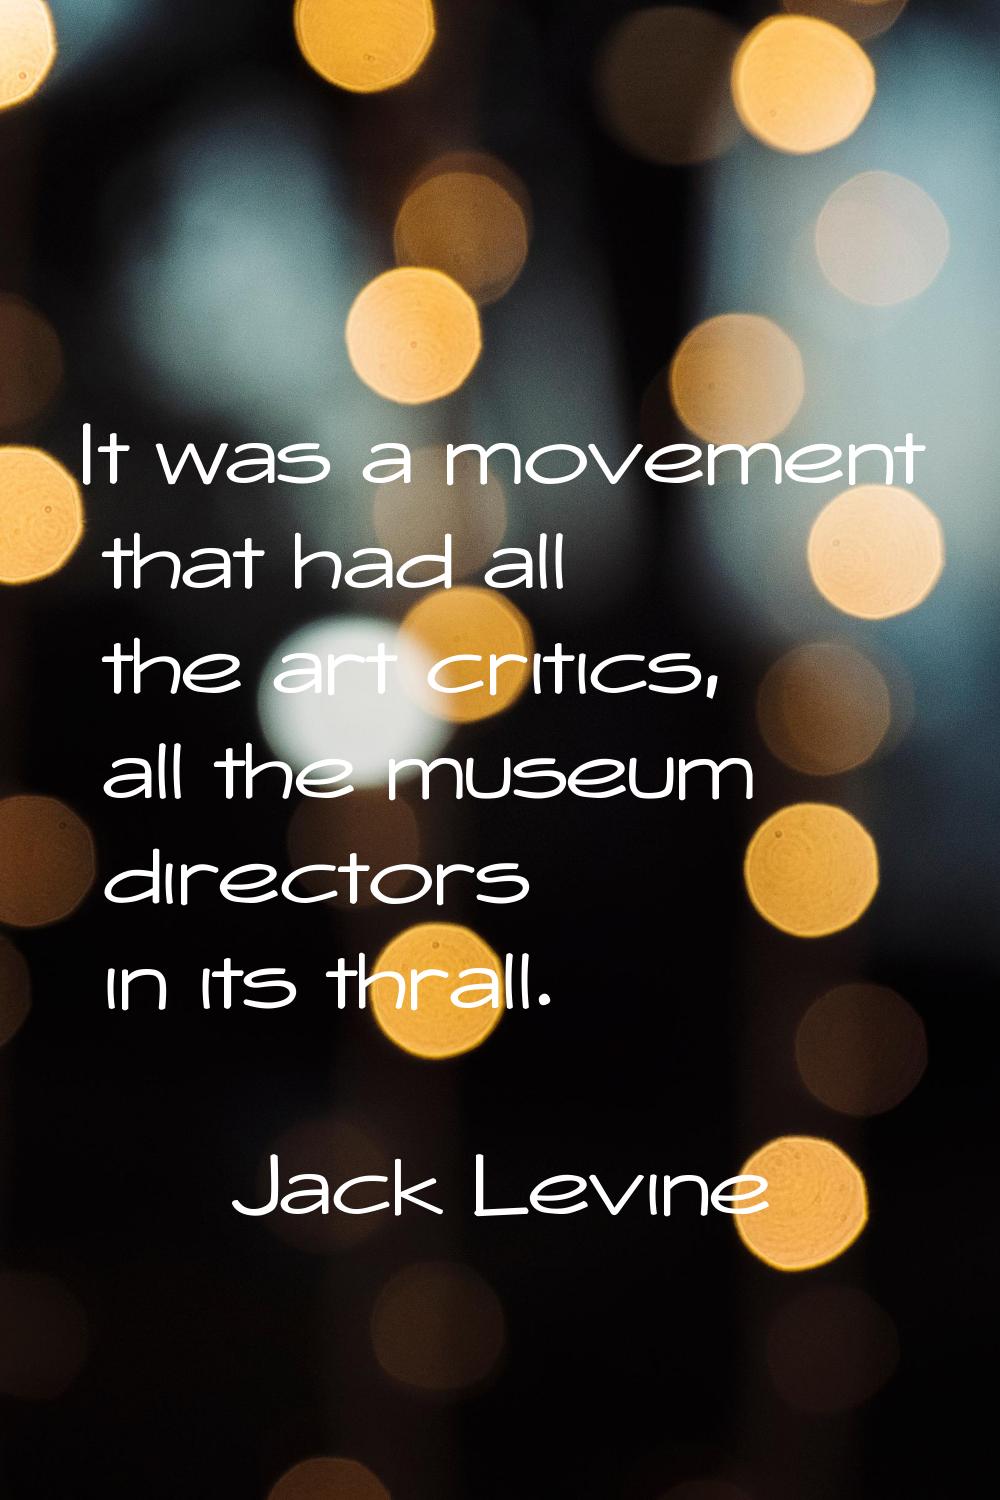 It was a movement that had all the art critics, all the museum directors in its thrall.